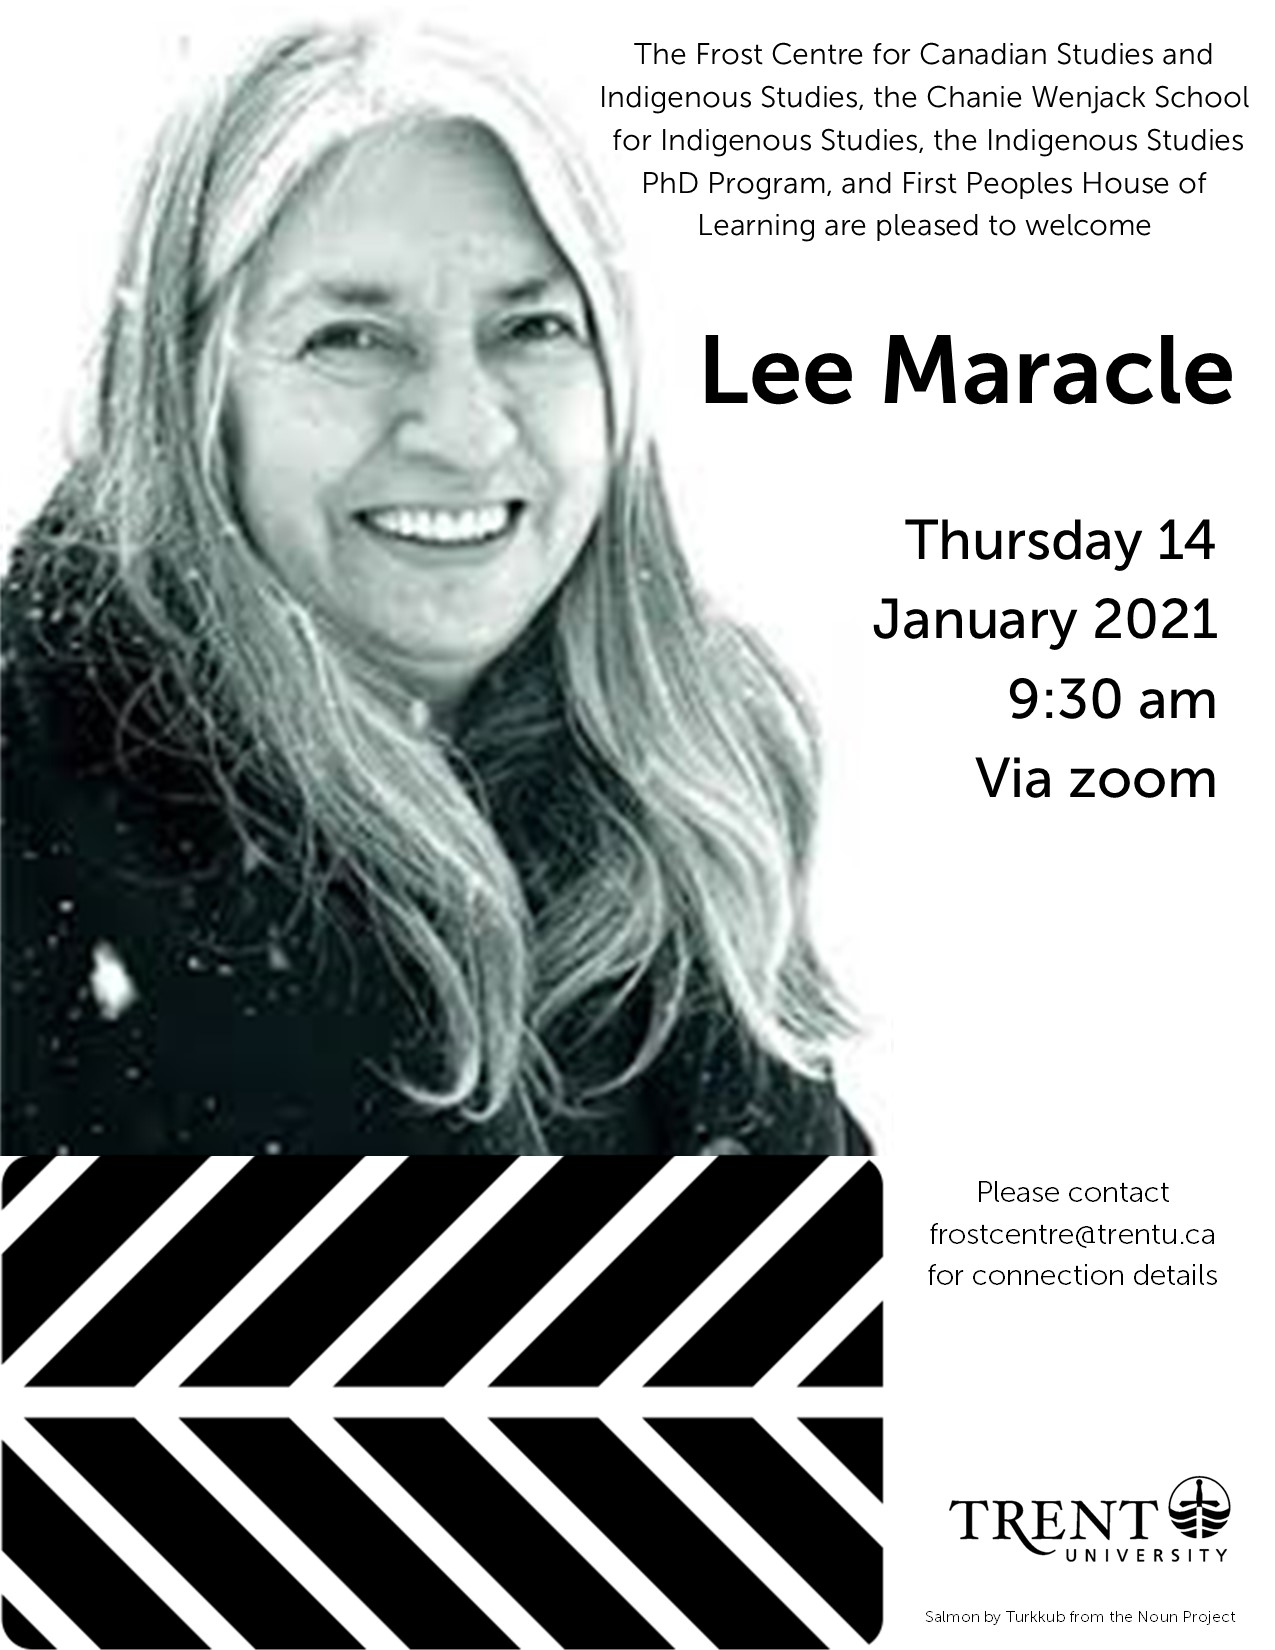 public lecture with Lee Maracle Thursday 14 January 2021